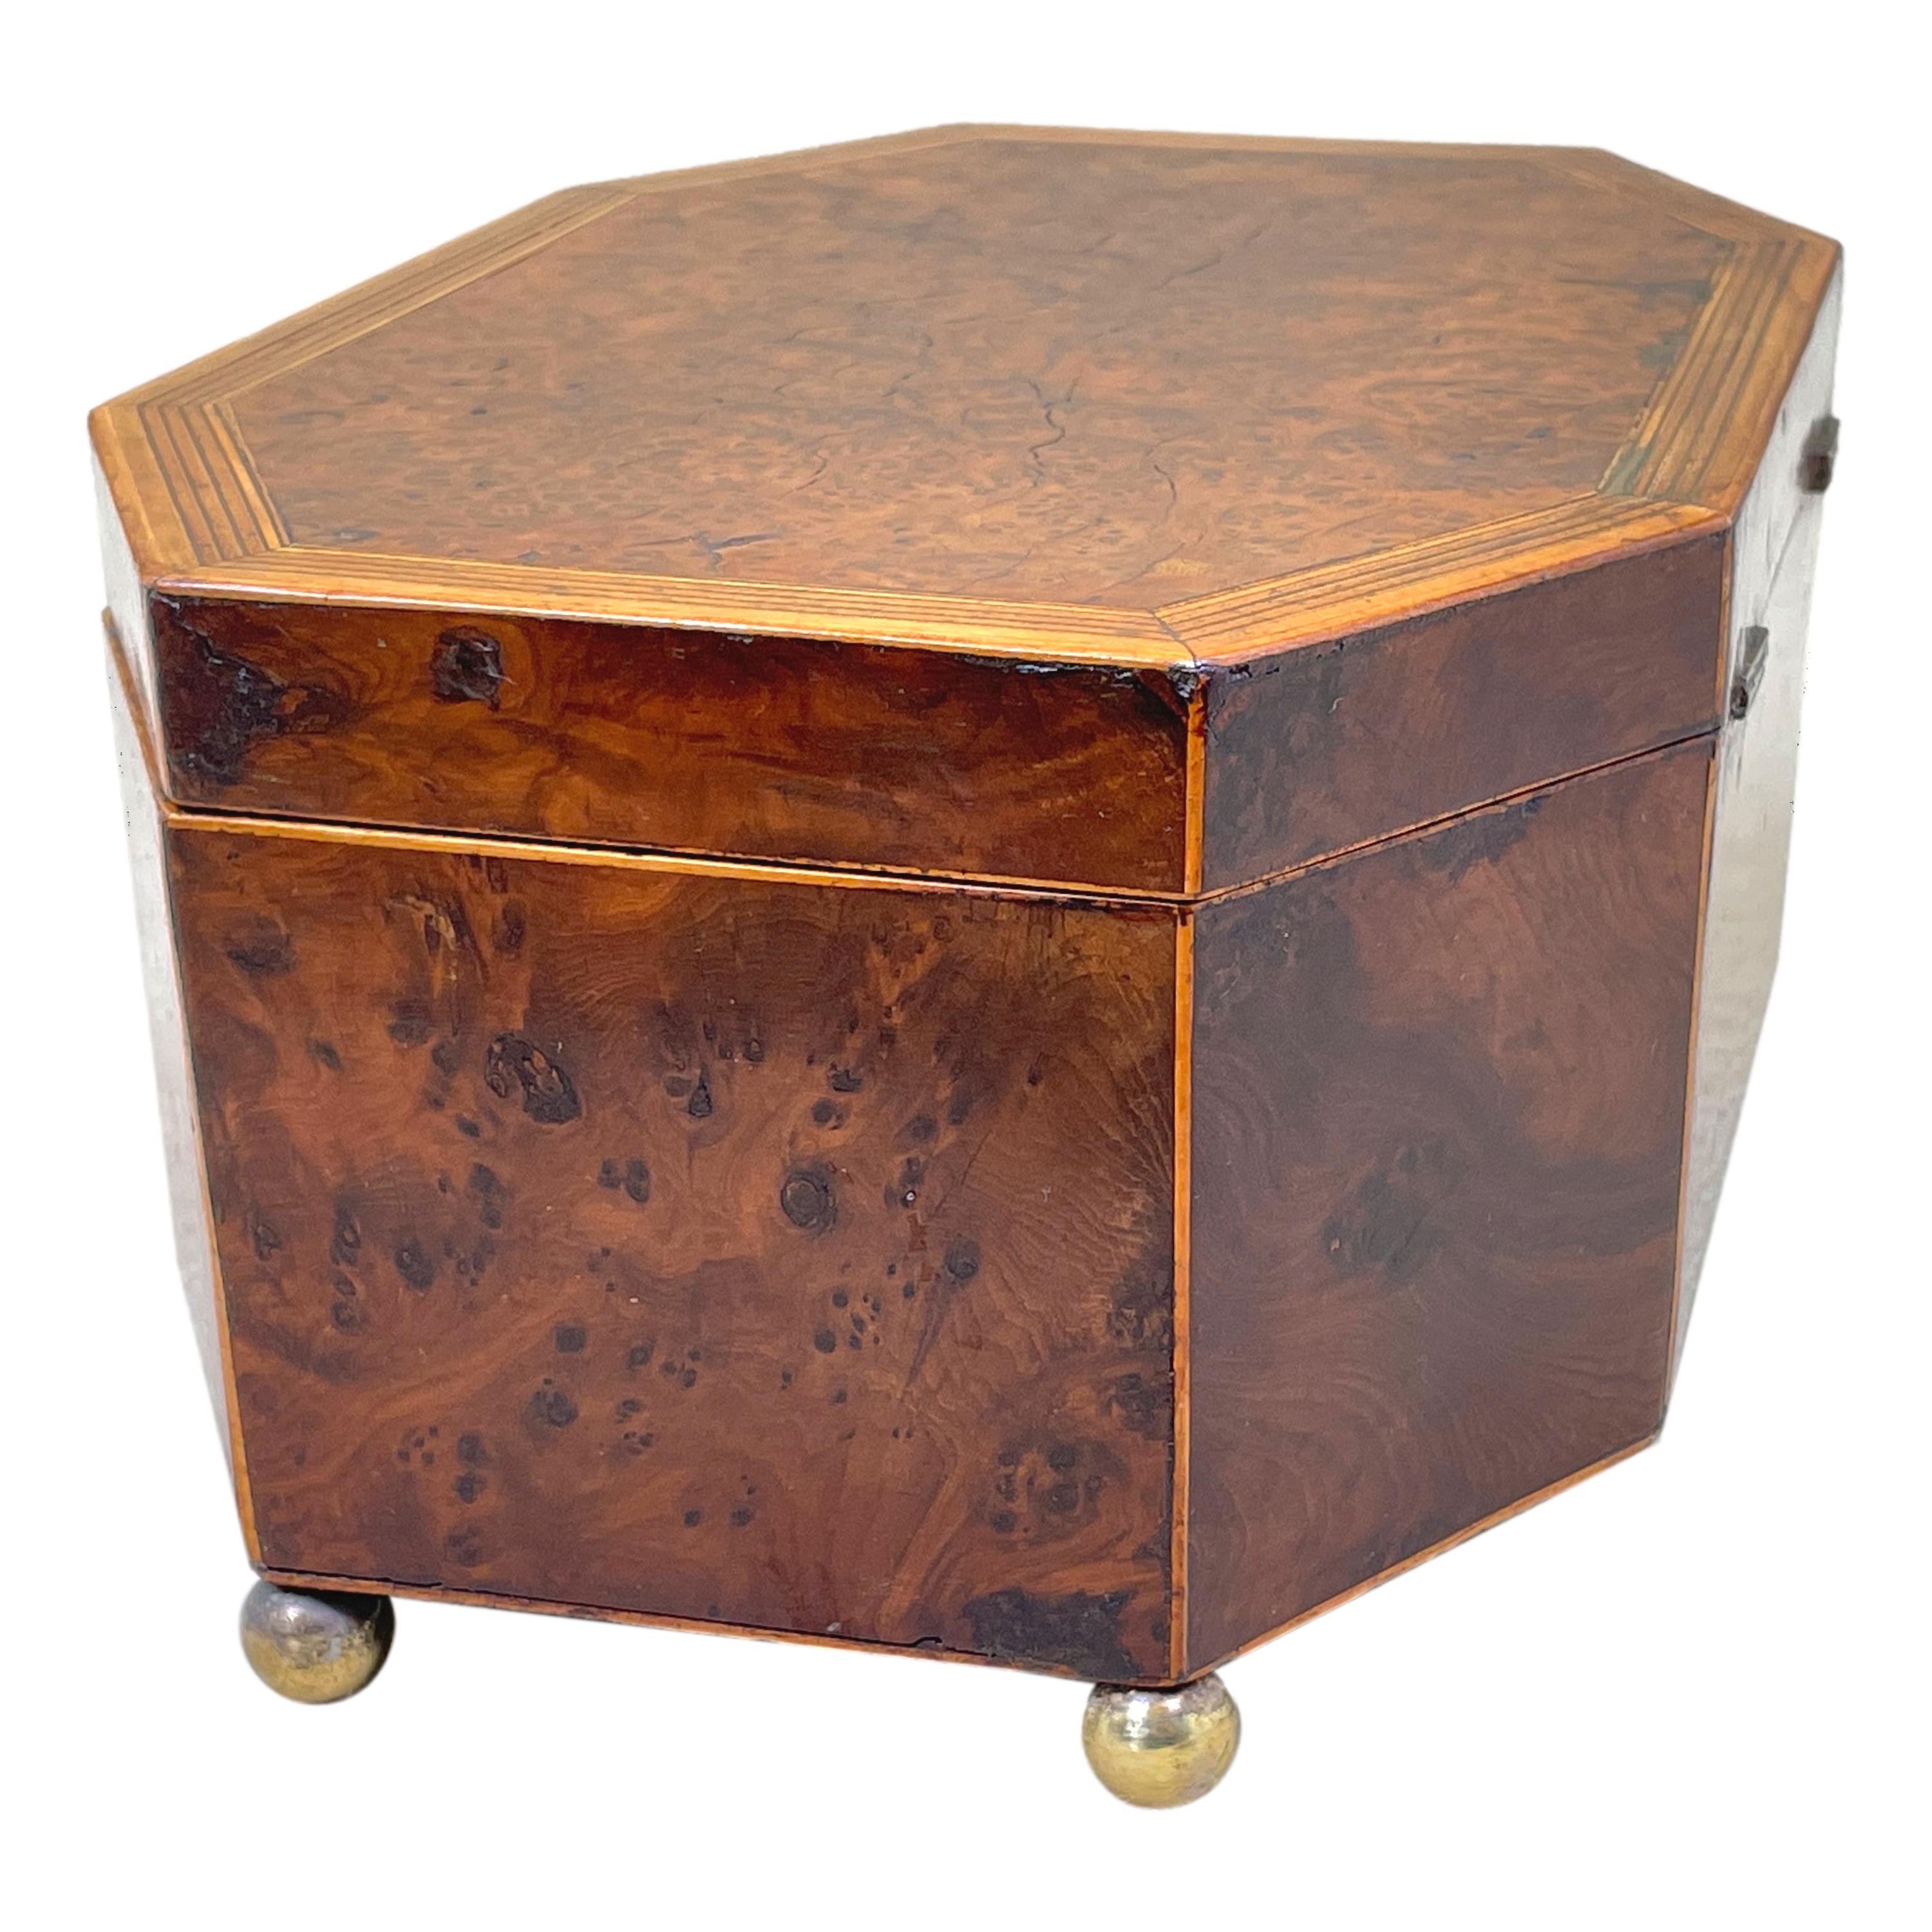 A very elegant George III period octagonal shaped burr yew wood jewellery box having attractive banded inlaid decoration to hinged lid enclosing lined interior raised on original brass ball feet. 

Just the right size for a bedside table or